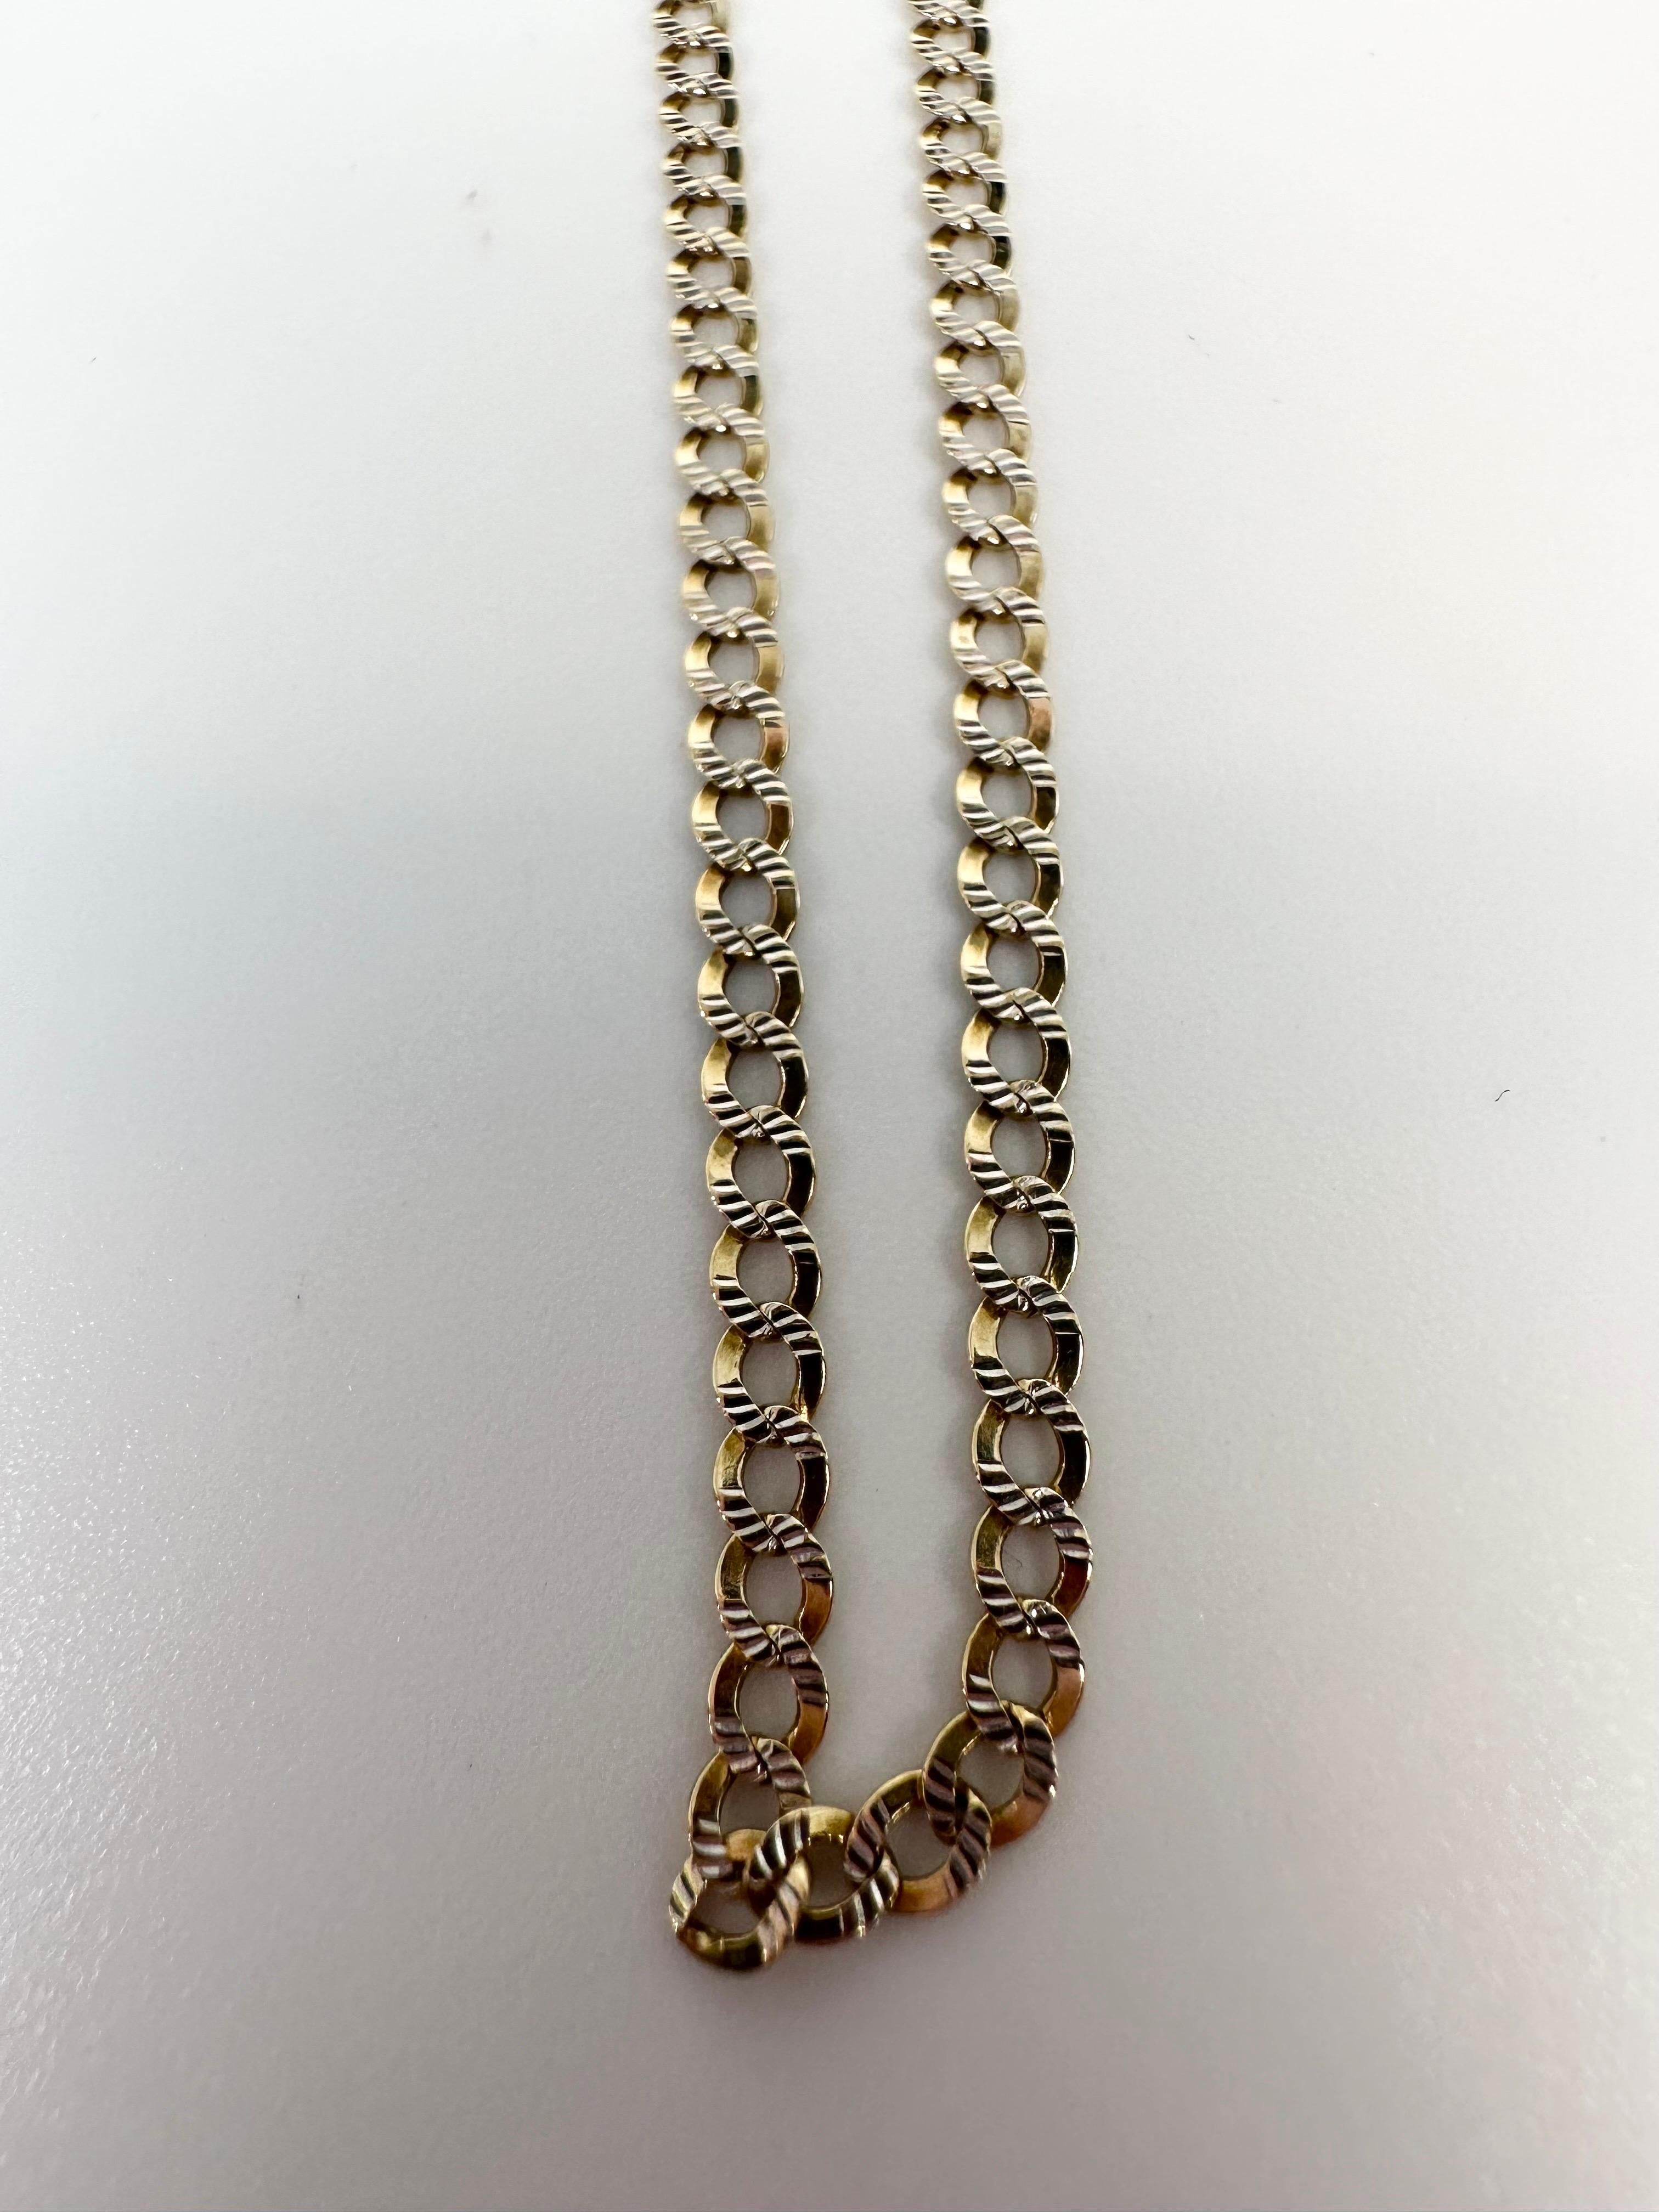 Curb chain long and elegant in 14KT yellow gold 21 inches long!

GOLD: 14KT gold
Grams:4.95
Width:2.7mm
Backing: omega
Item:43000075att

WHAT YOU GET AT STAMPAR JEWELERS:
Stampar Jewelers, located in the heart of Jupiter, Florida, is a custom